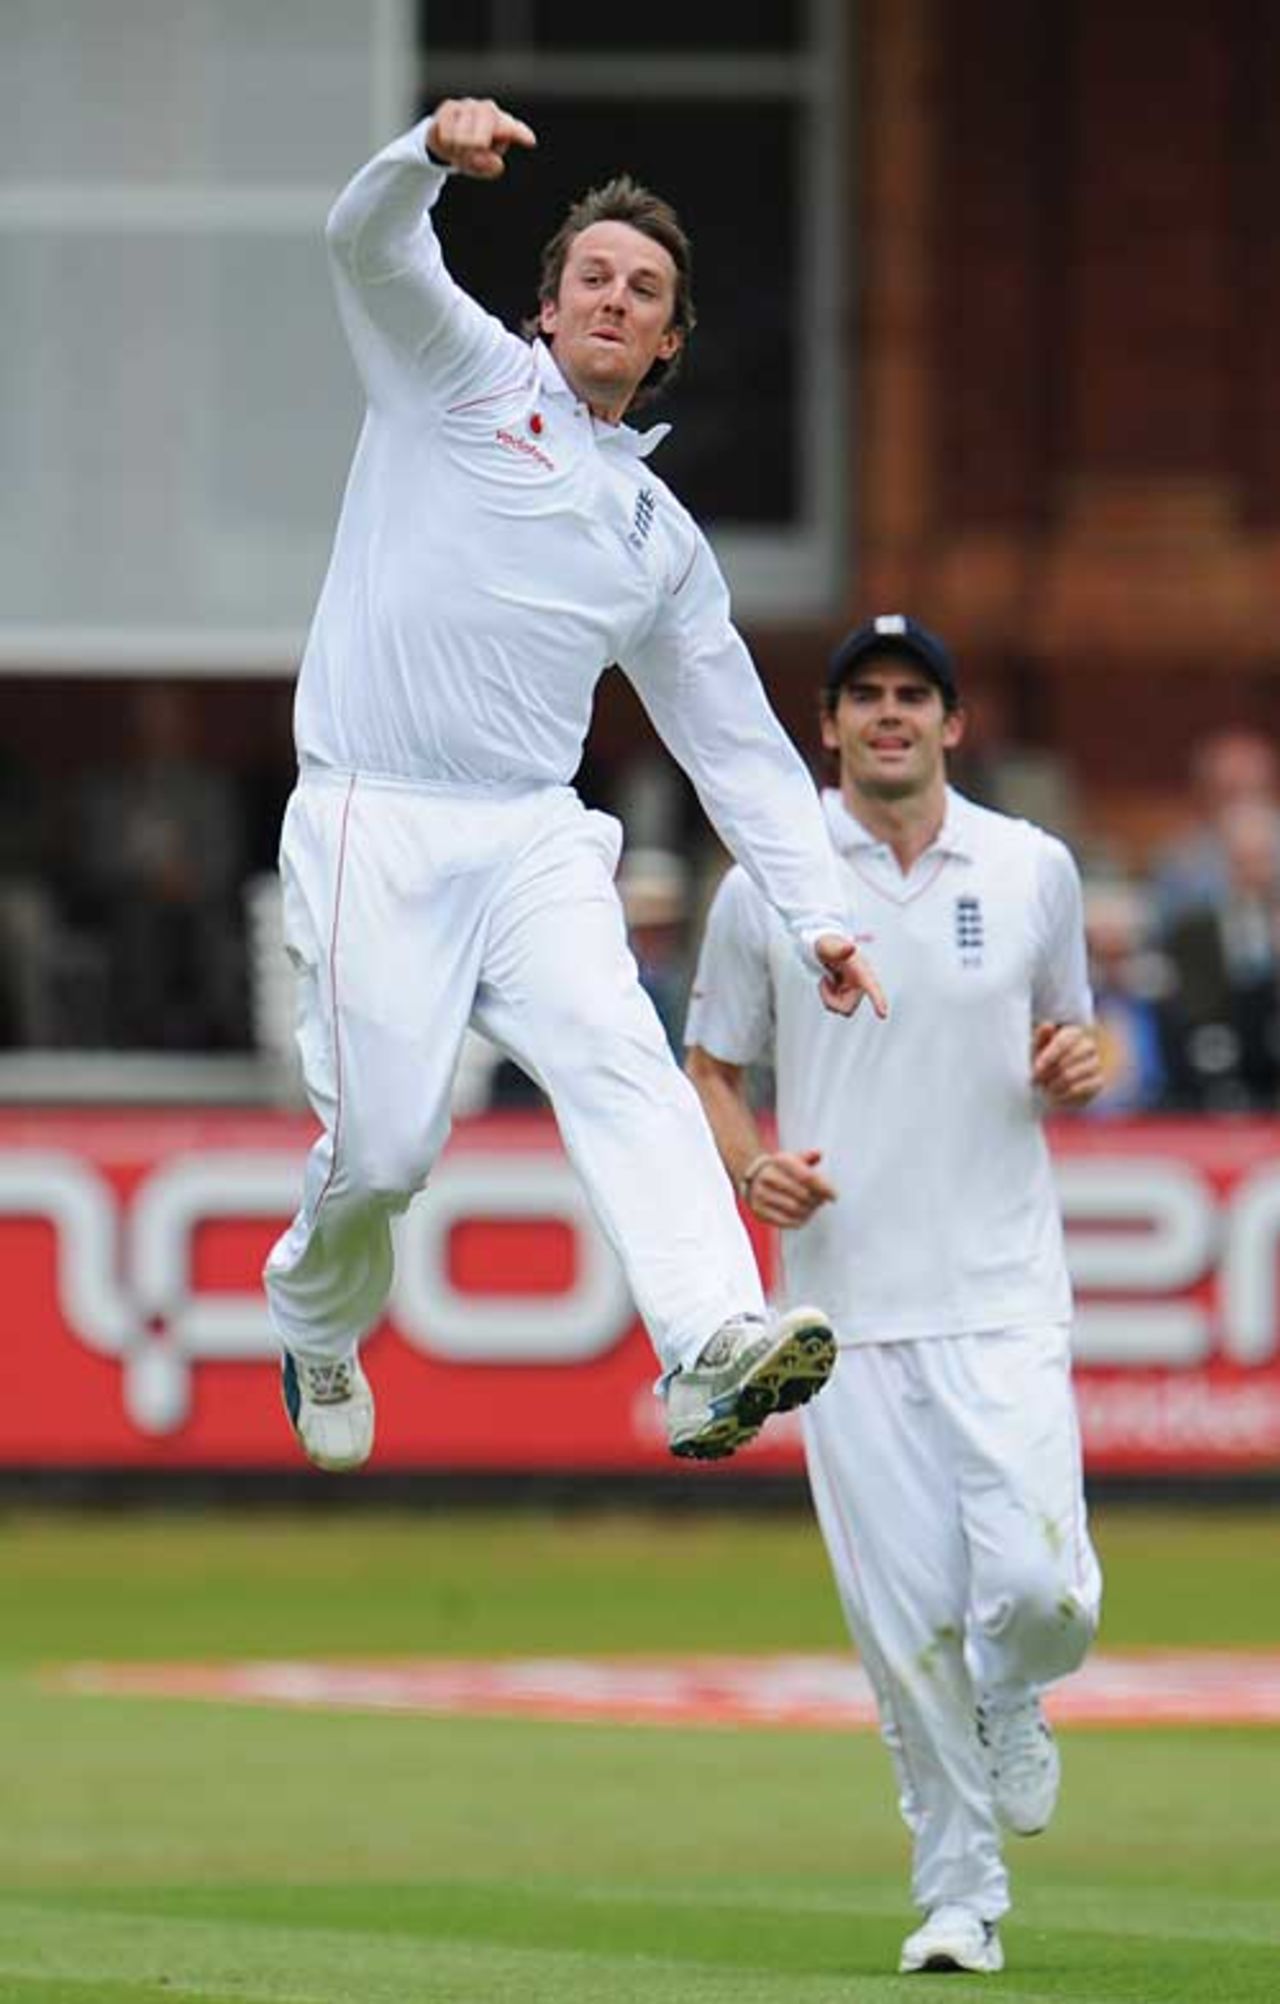 Graeme Swann shows his delight after removing Devon Smith, England v West Indies, 1st Test, Lord's, May 7, 2009